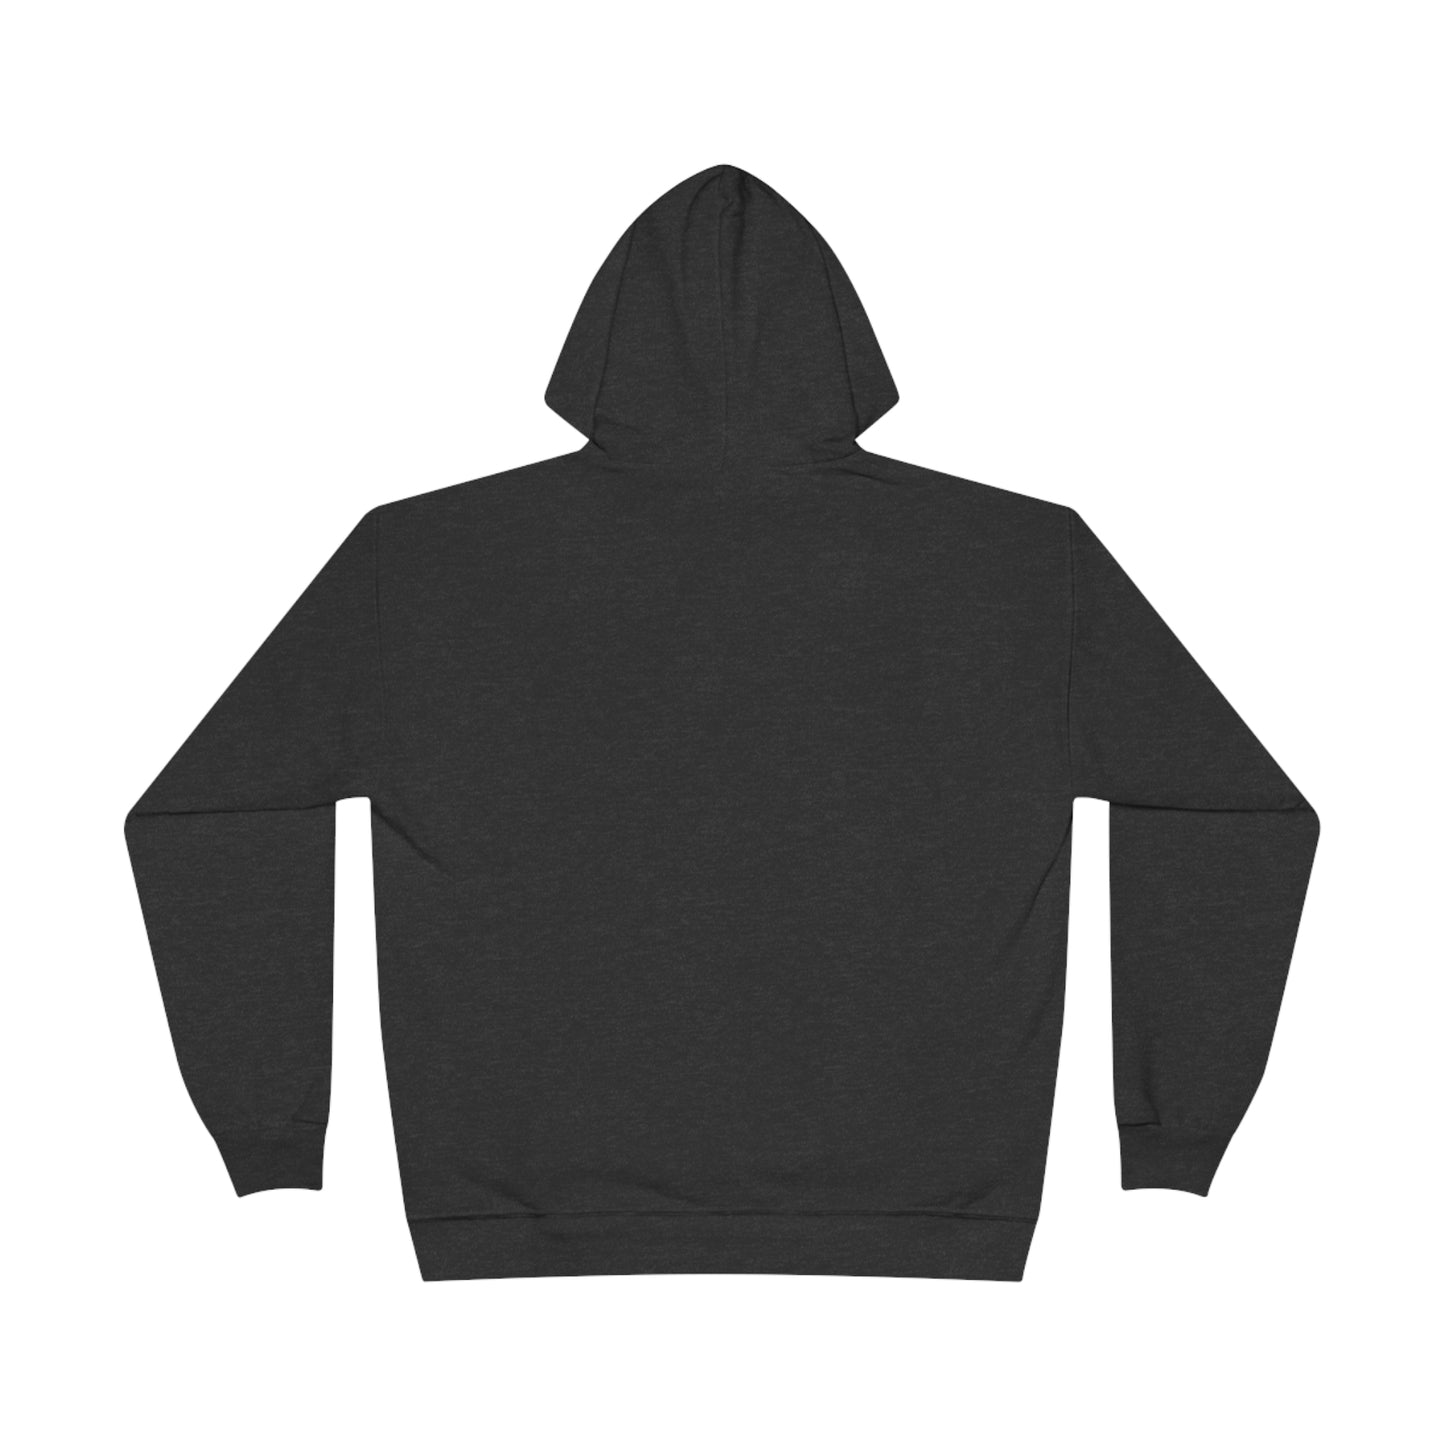 PartyNMotion EcoSmart Pullover Hoodie Sweatshirt (PNM logo front, blank back)